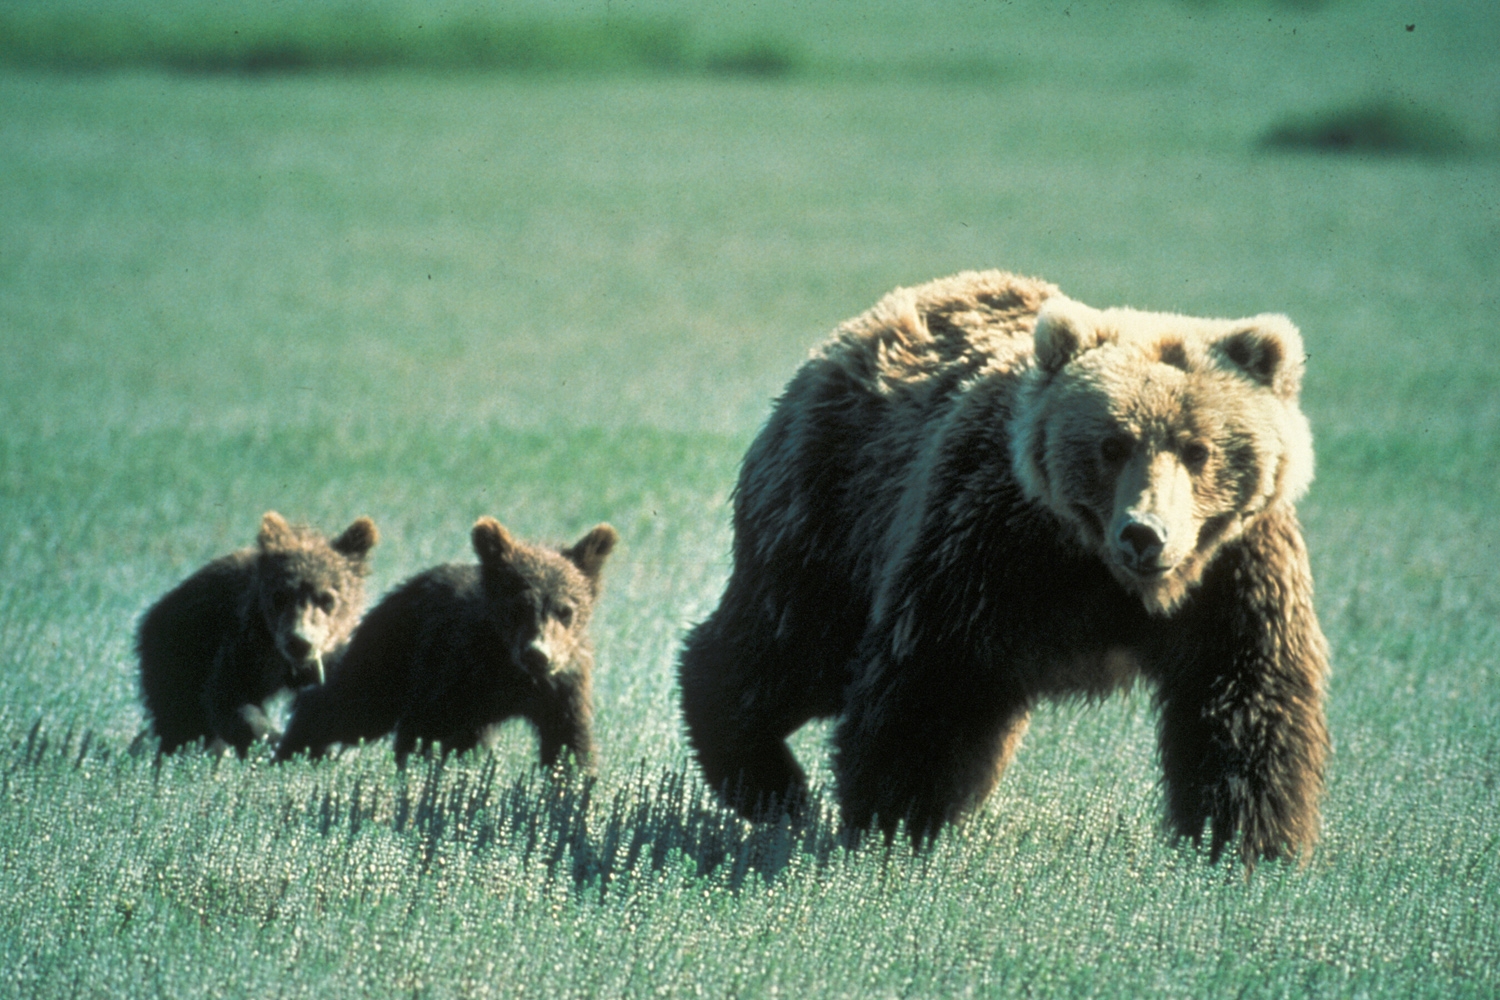 Two hikers were attacked by a grizzly.